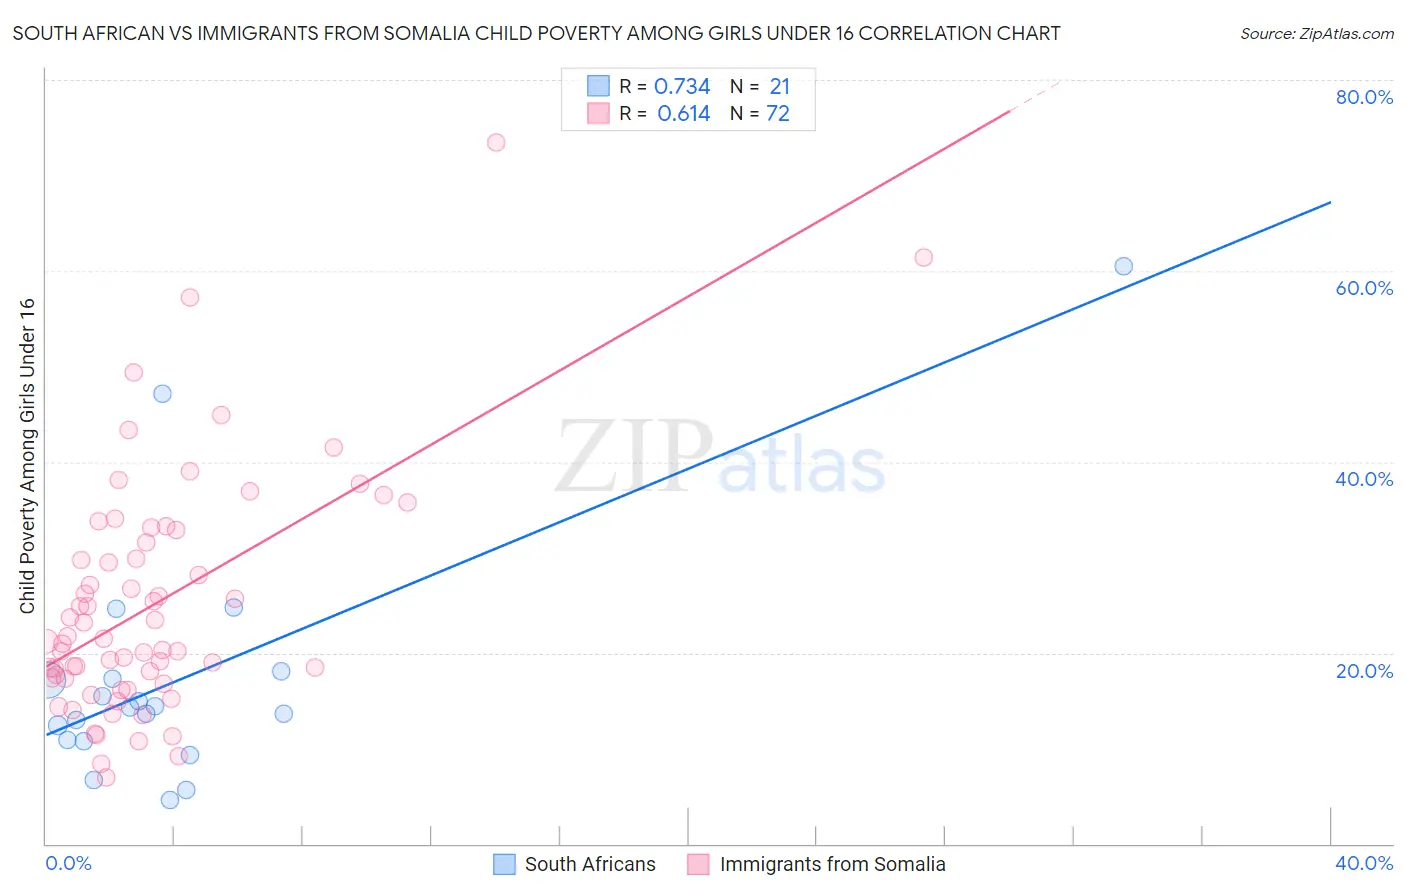 South African vs Immigrants from Somalia Child Poverty Among Girls Under 16